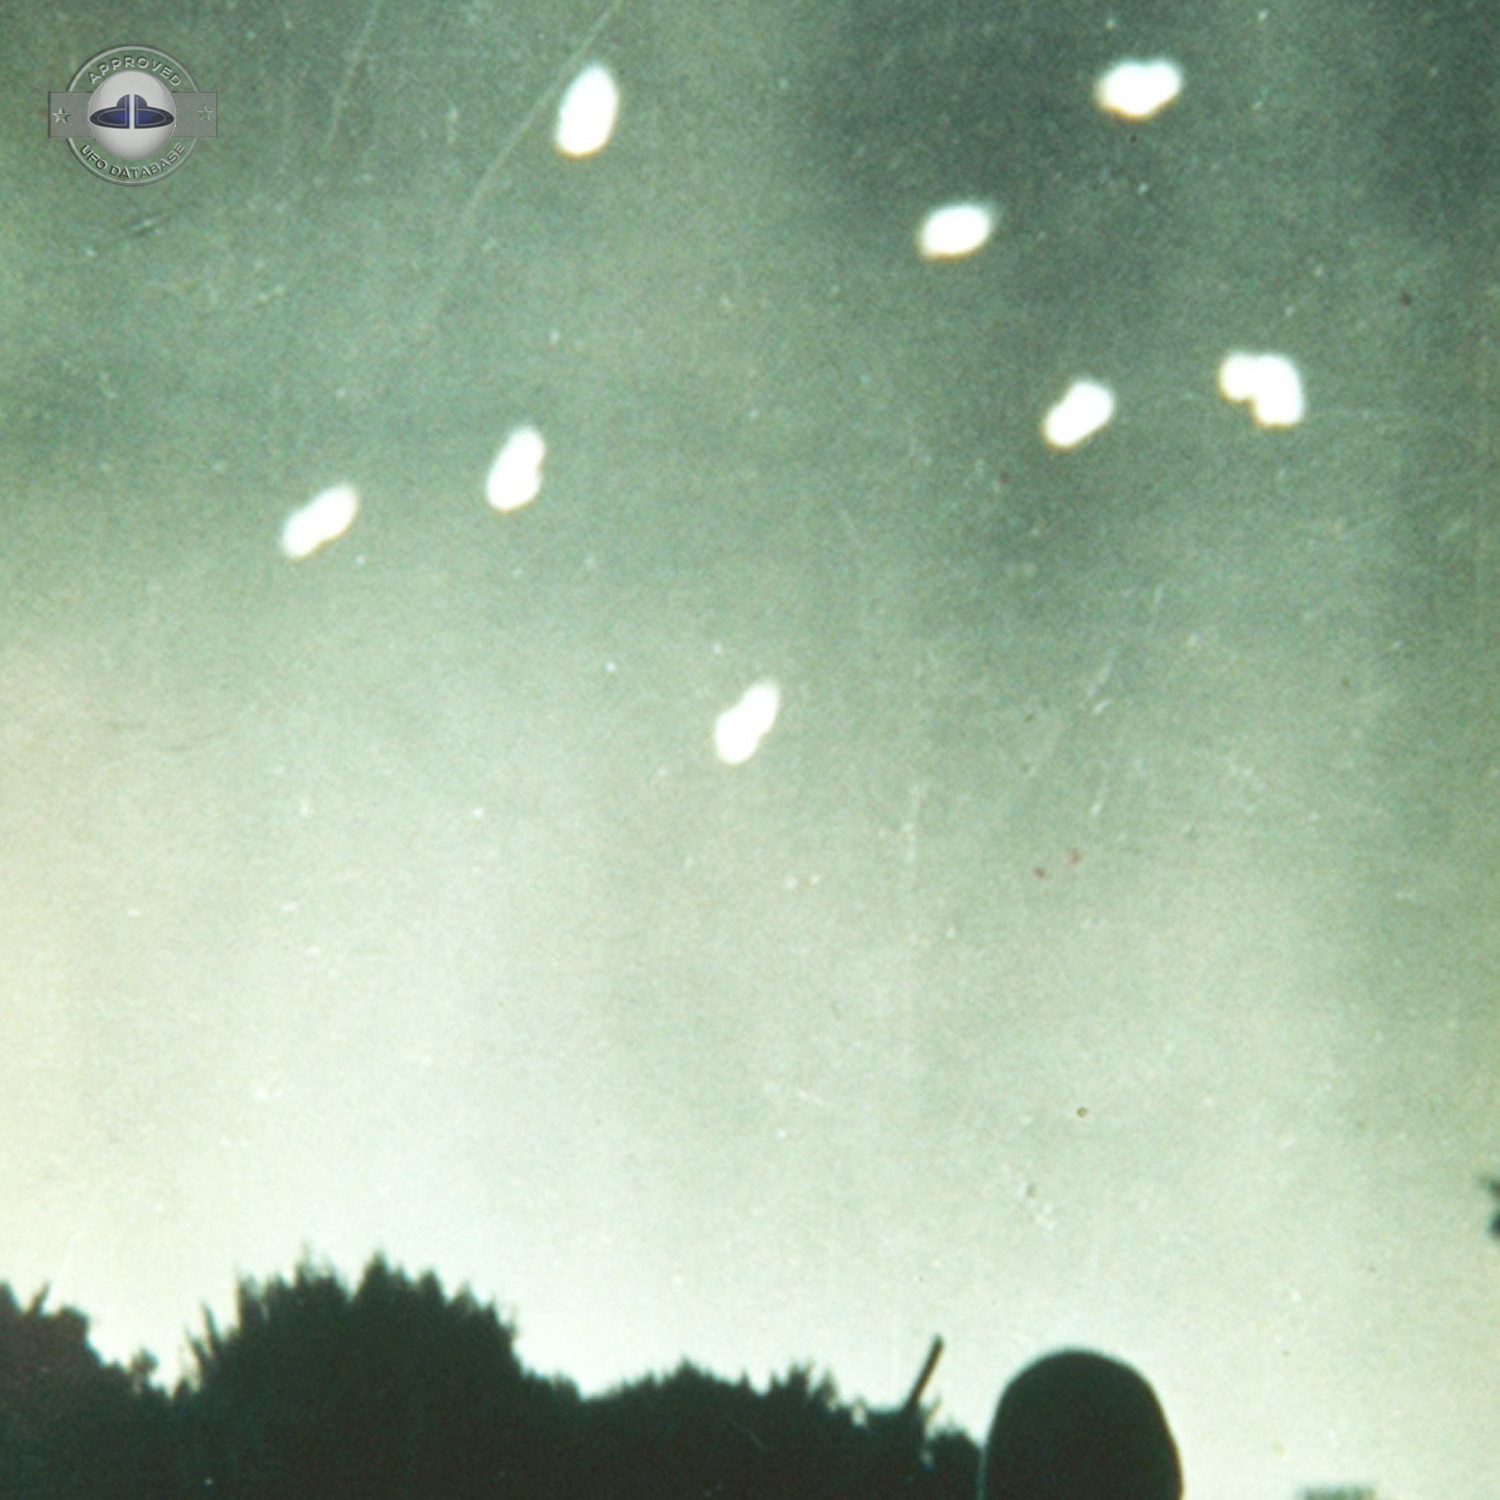 8 UFOs over Ashoka Ashram in Mehrauli India | 1964 | by Billy Meier UFO Picture #177-2